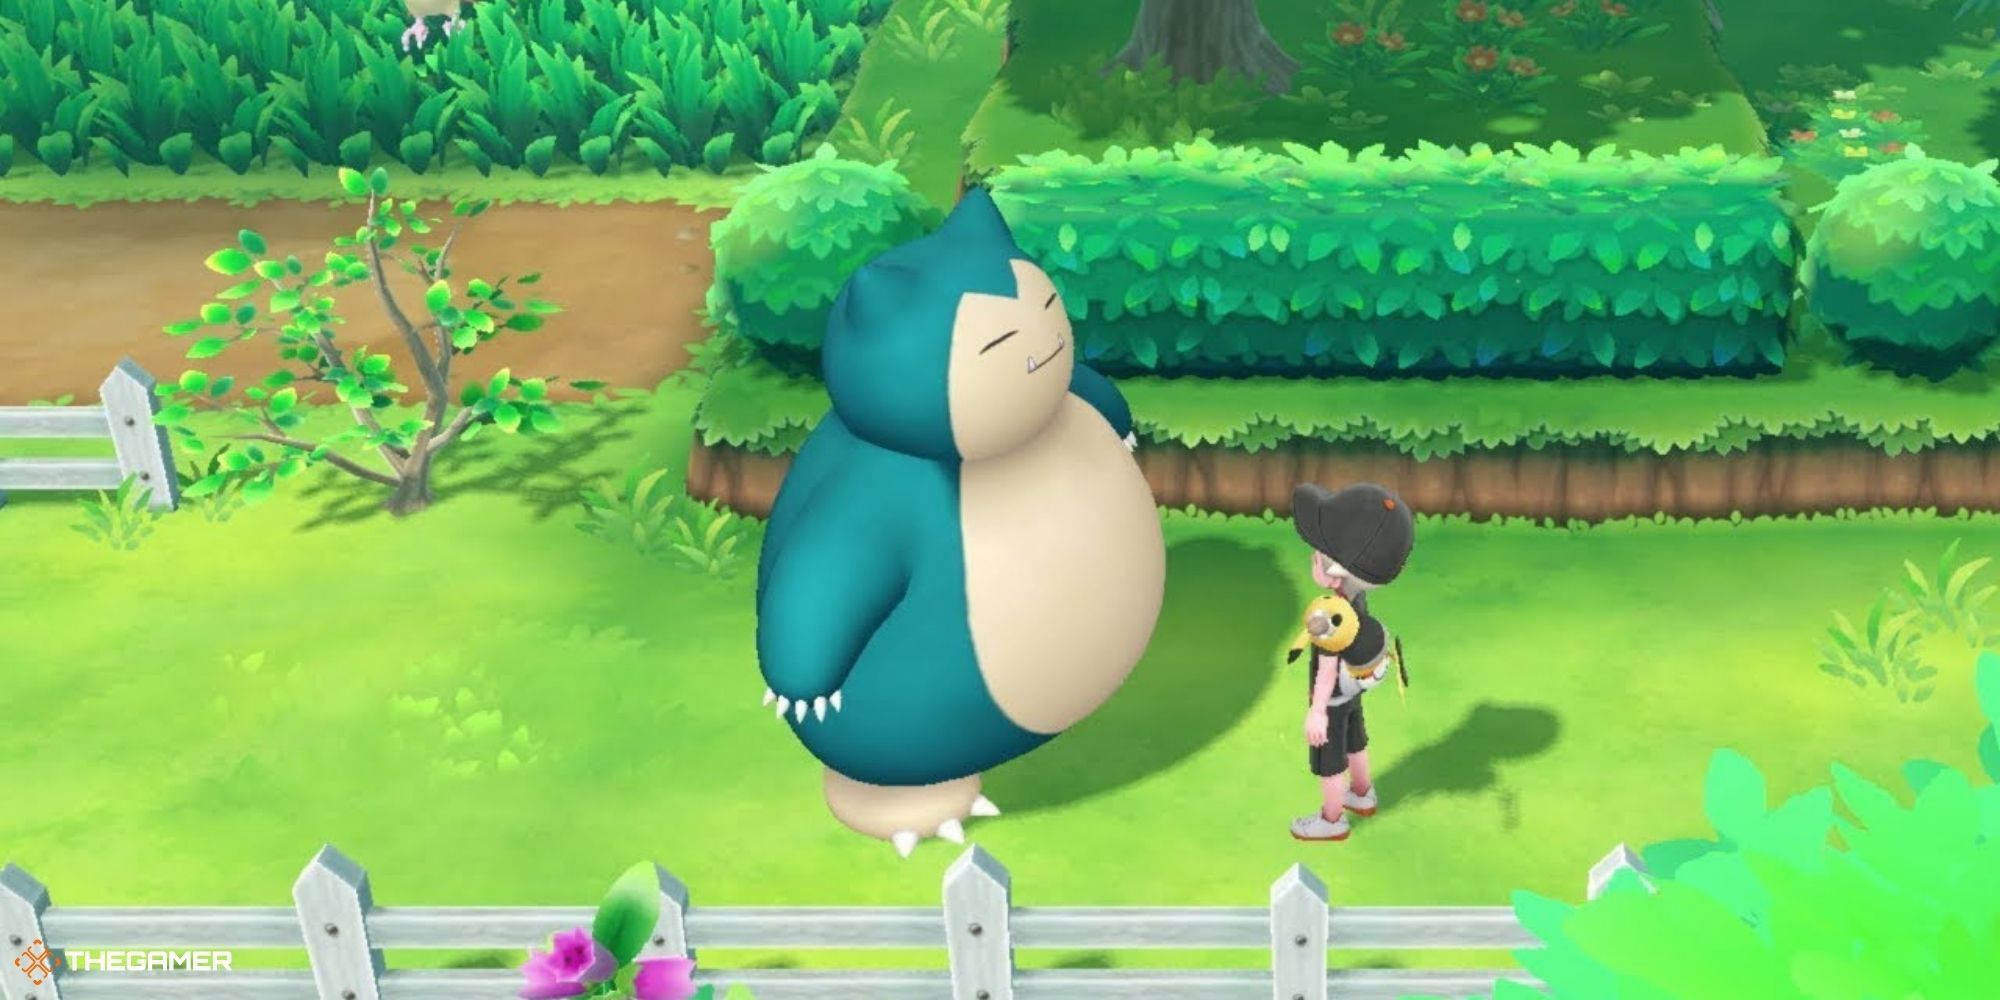 Let's Go Pikachu and Eevee - Snorlax and player in grassy fenced pathway